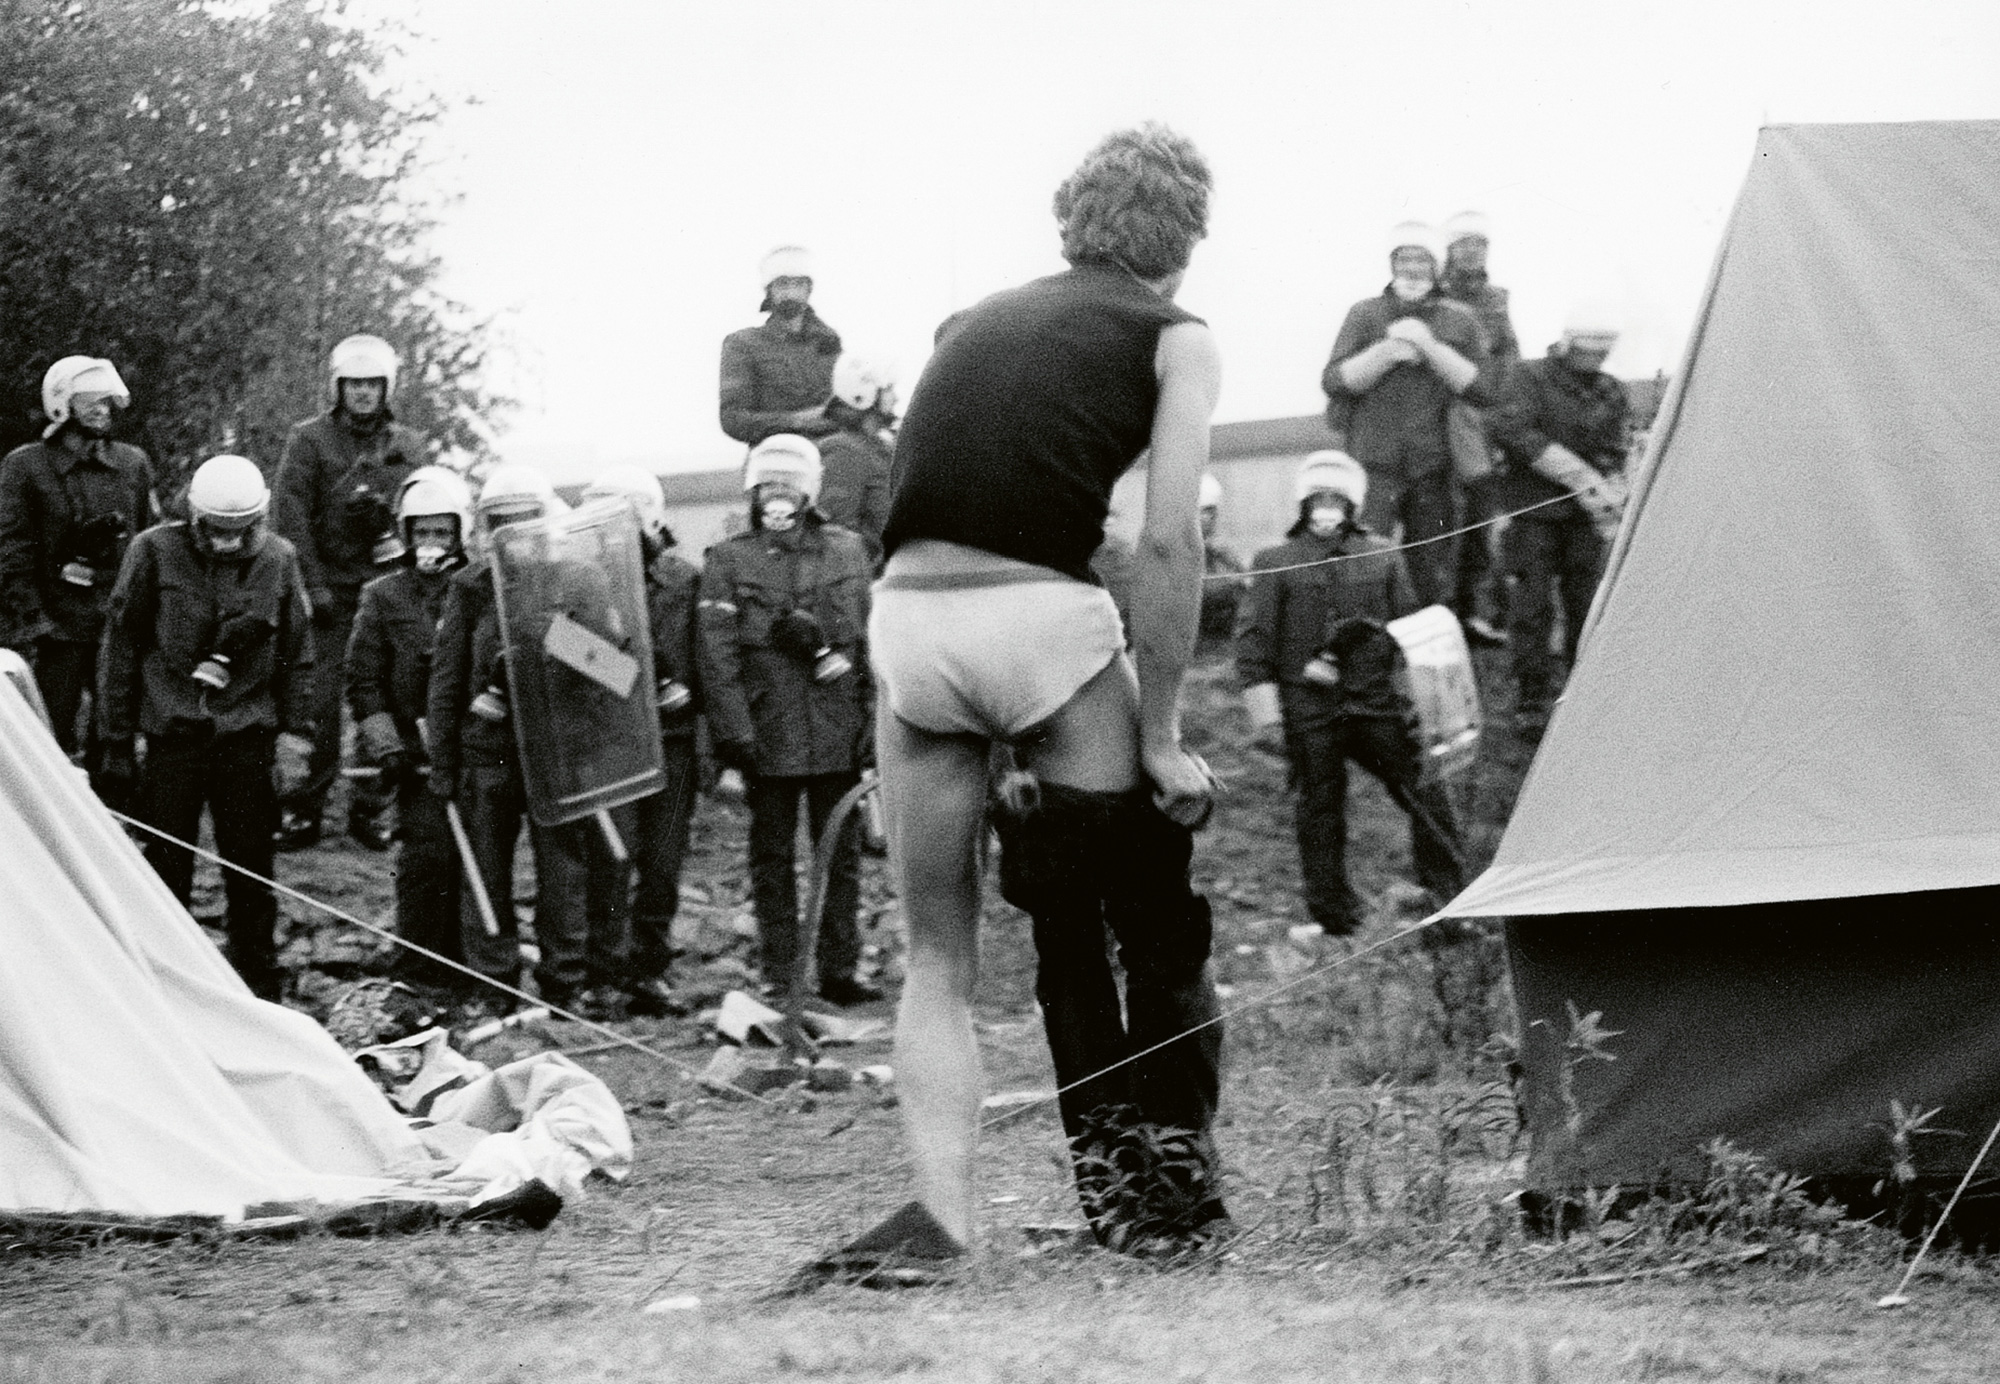 A brief moment in time. West German police surround the encampment built by protesters on the Lenné Triangle in the summer of 1988. Courtesy Umbruch Bildarchiv, umbruch-bildarchiv.de.